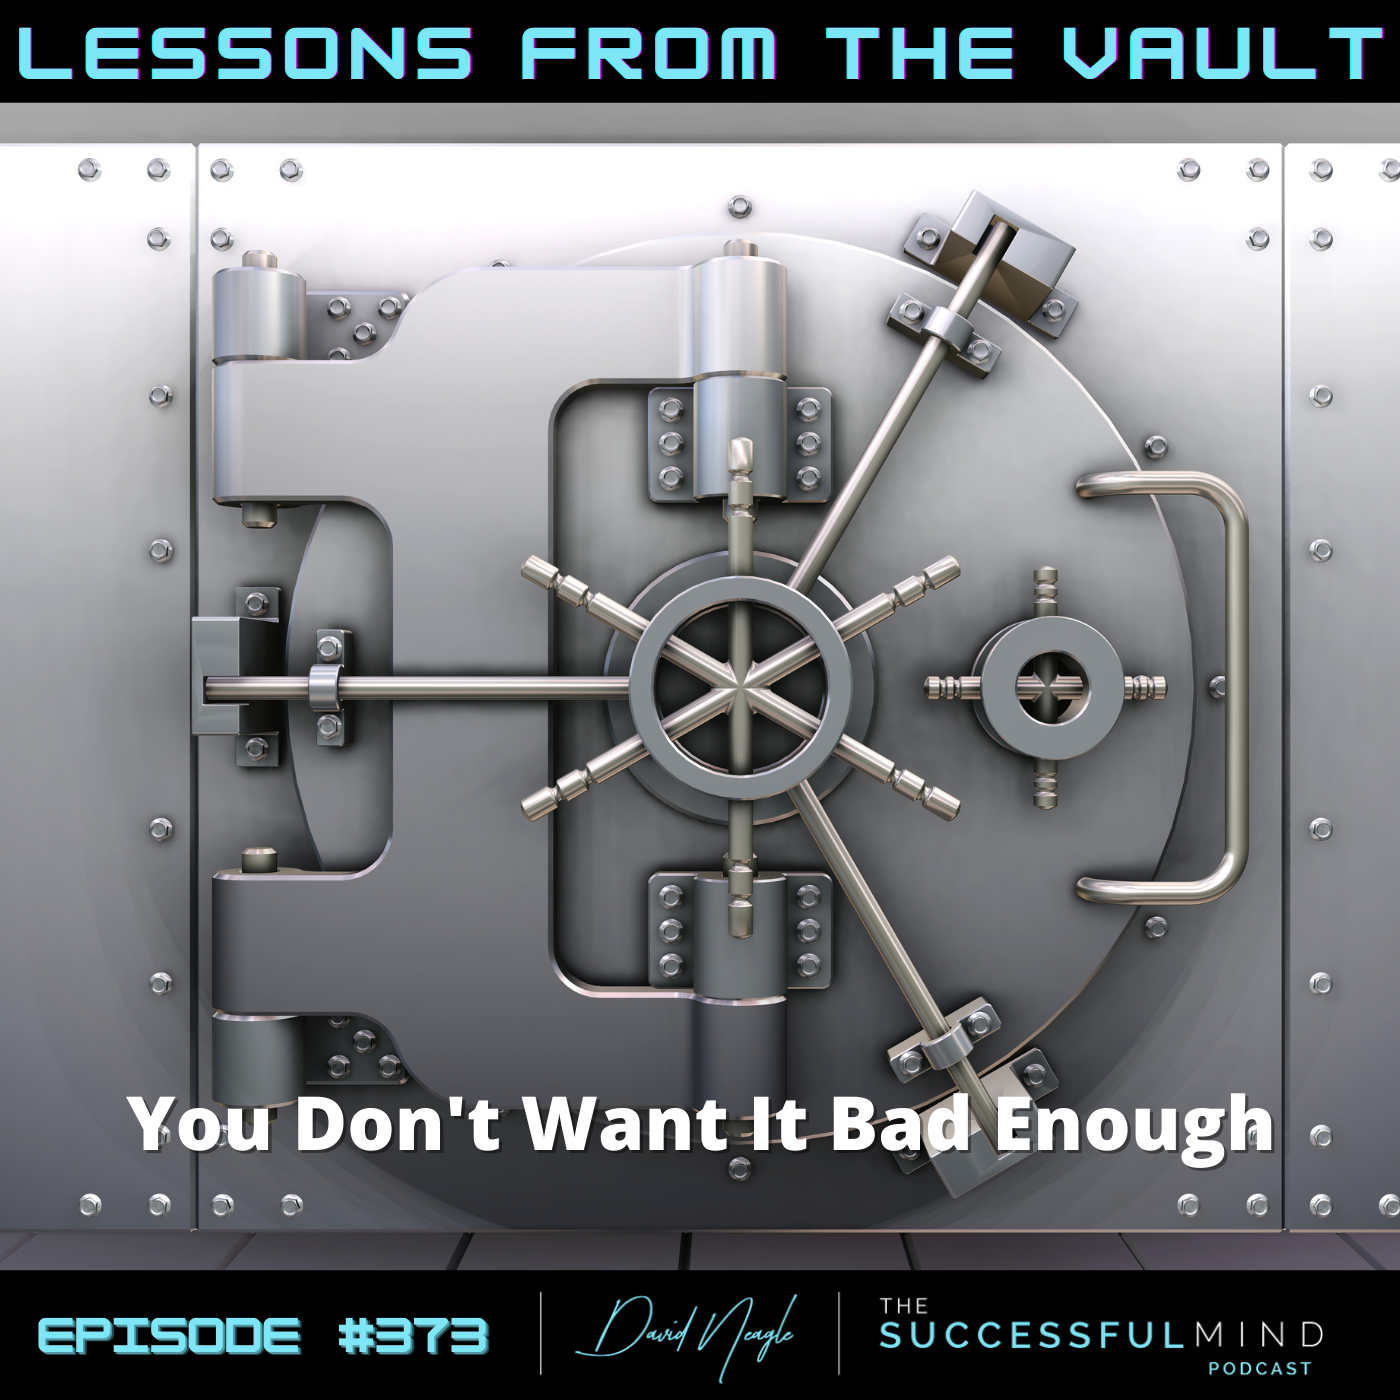 The Successful Mind Podcast – Episode 373 – Lessons From The Vault: You Don’t Want It Bad Enough